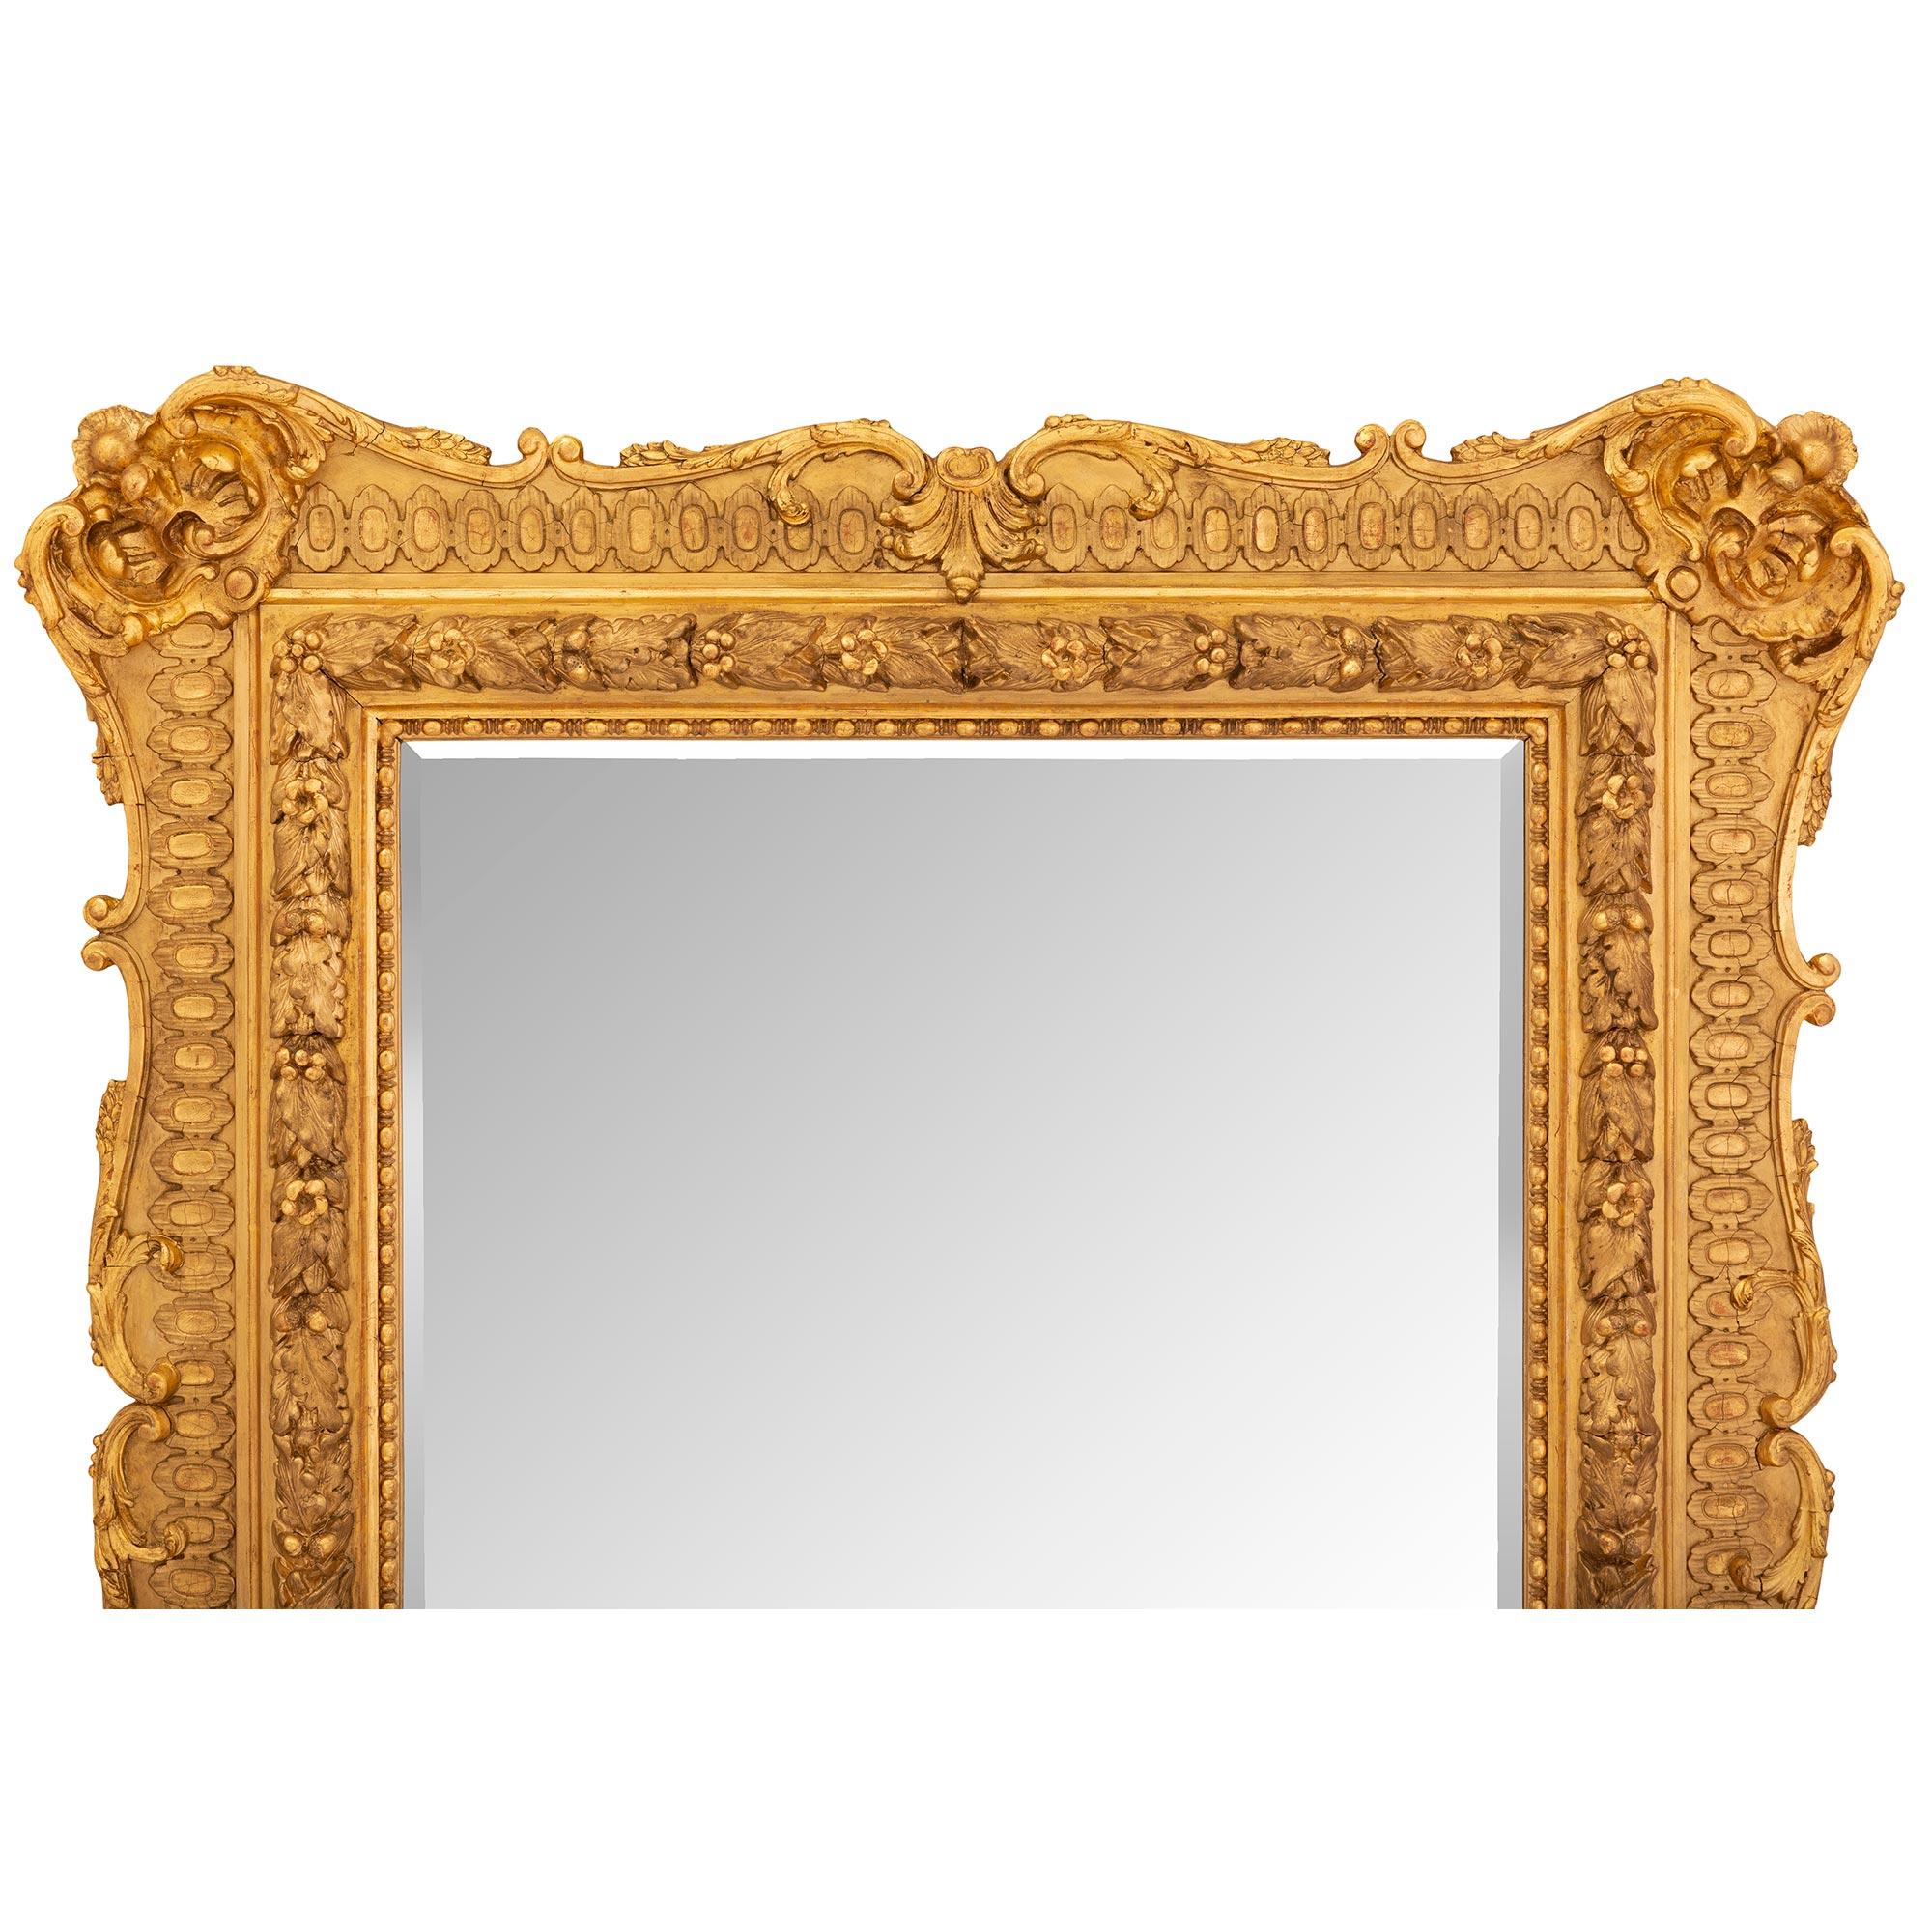 French Mid-19th Century Louis XV Rectangular Giltwood Mirror In Good Condition For Sale In West Palm Beach, FL